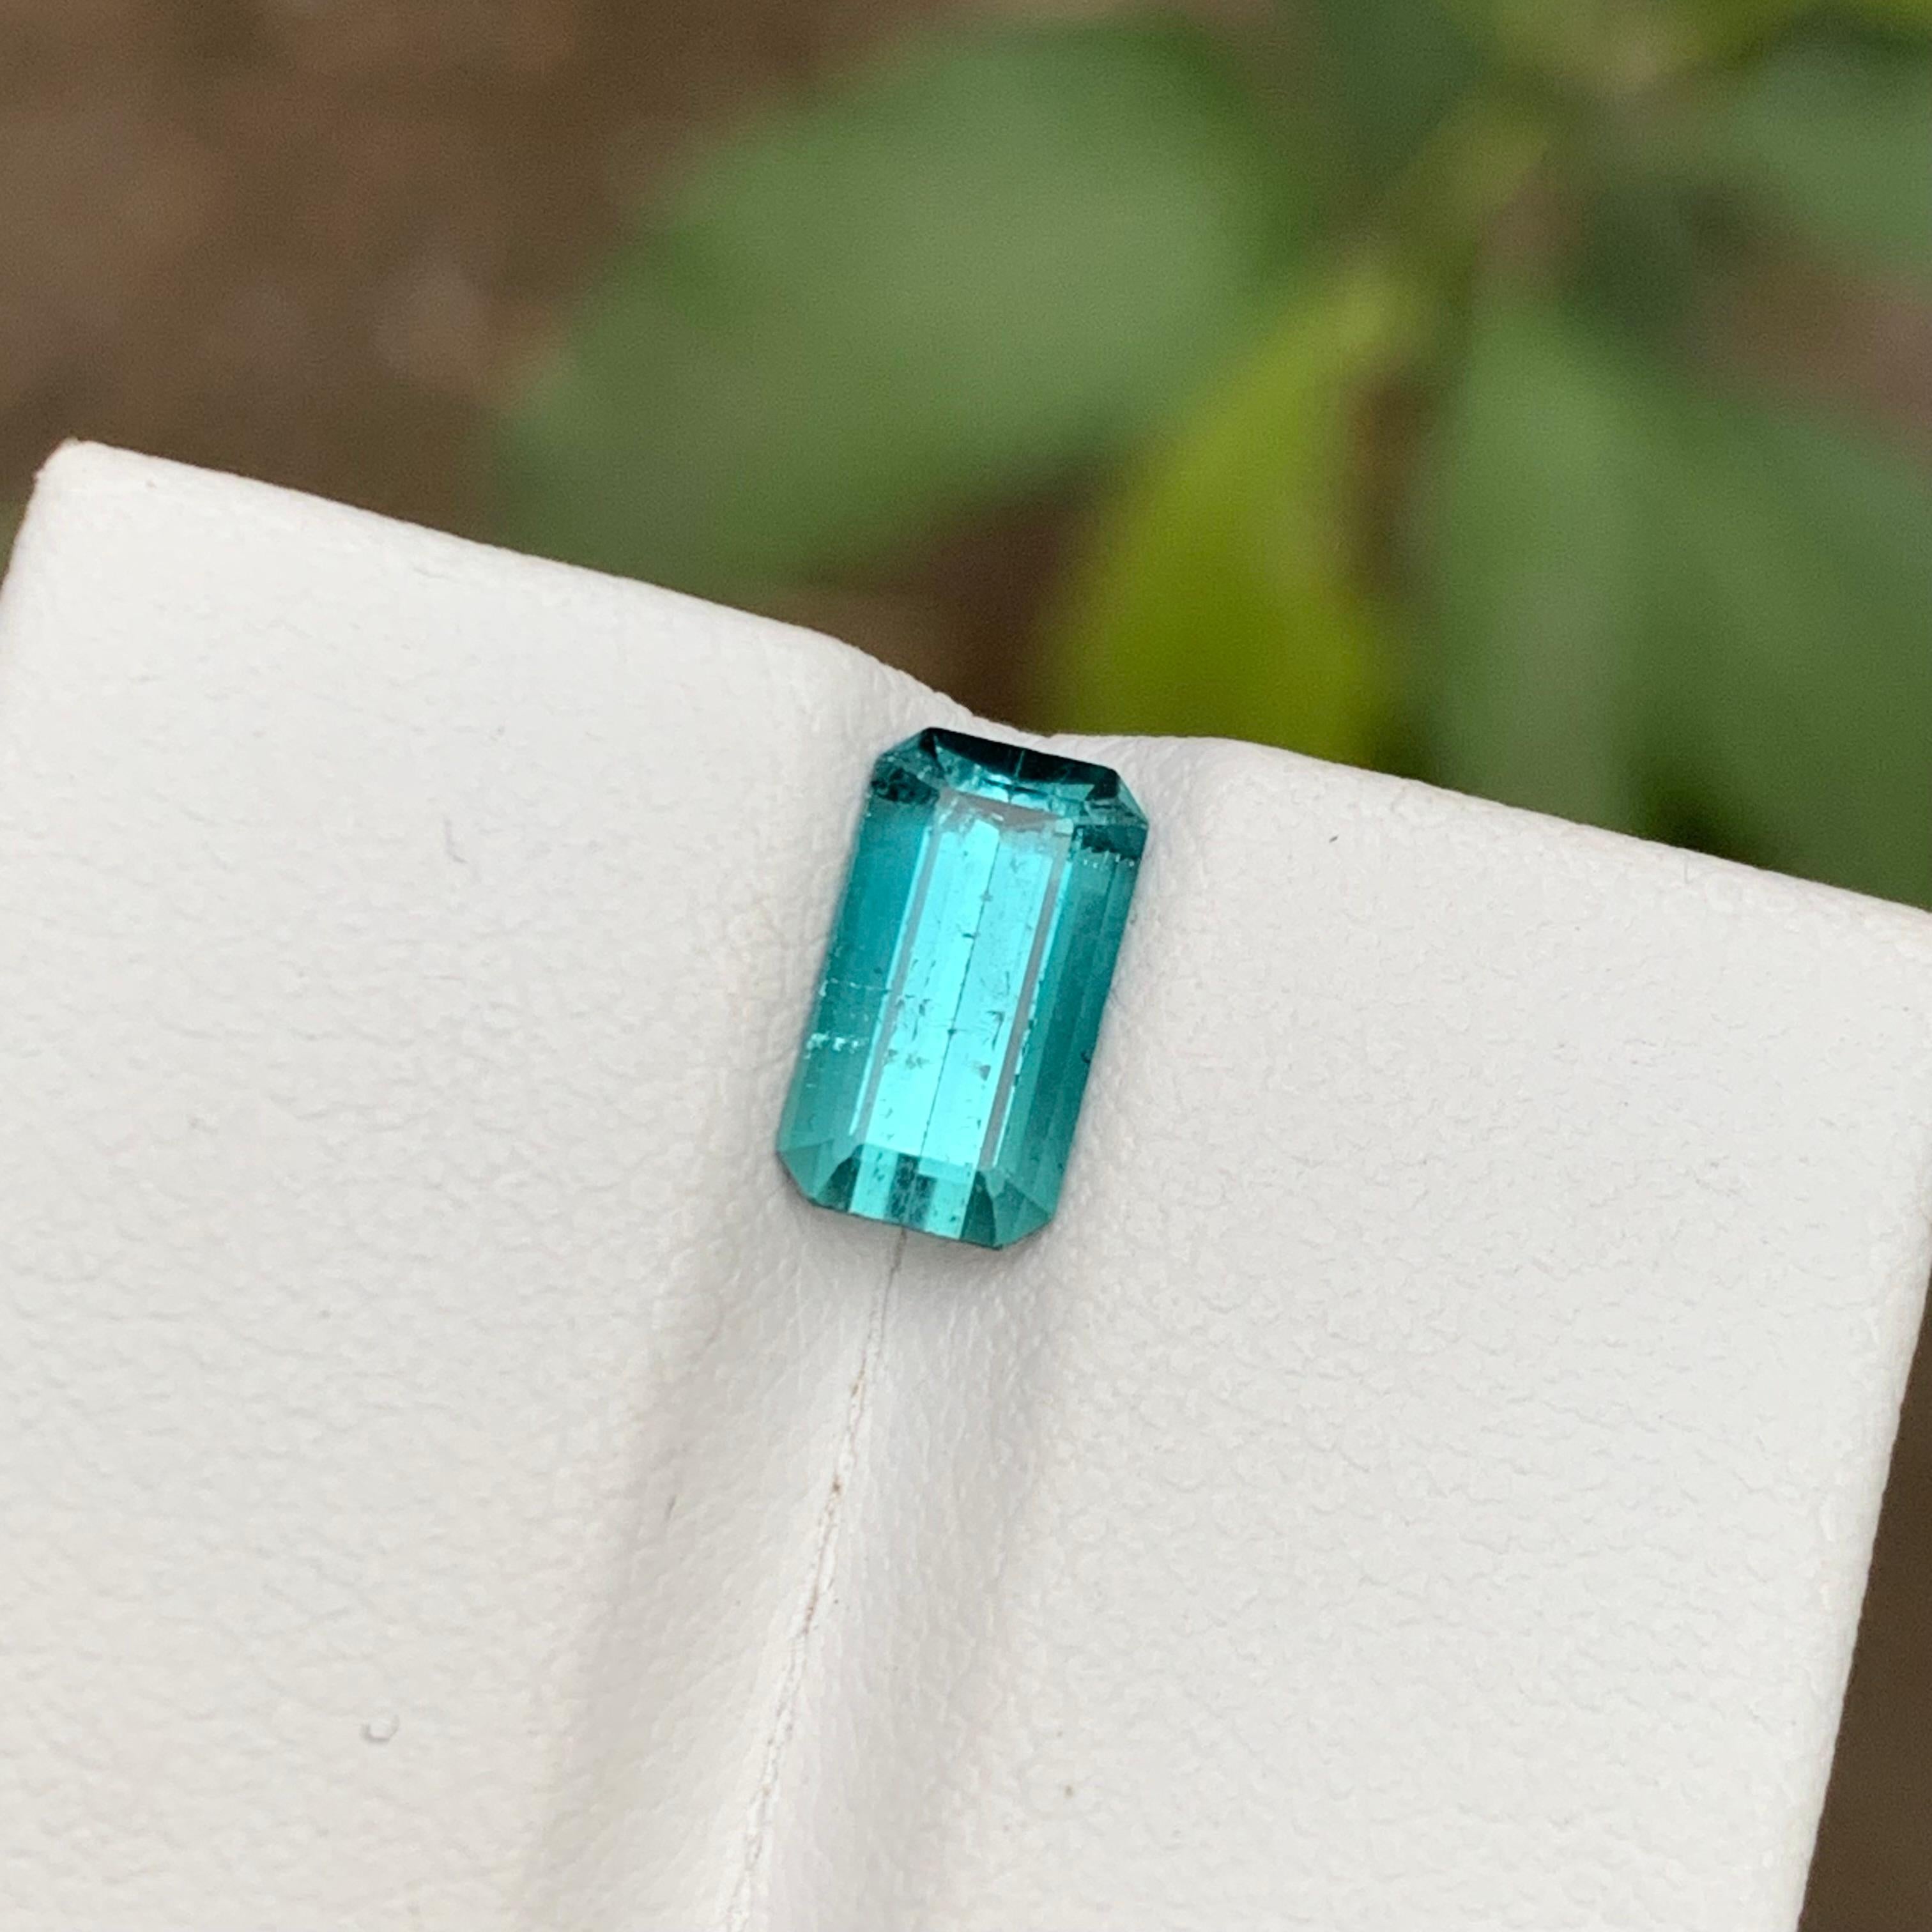 GEMSTONE TYPE: Tourmaline
PIECE(S): 1
WEIGHT: 1.60 Carats
SHAPE: Emerald Cut
SIZE (MM): 8.91 x 5.04 x 4.08
COLOR: Blue
CLARITY: Slightly Included 
TREATMENT: None
ORIGIN: Afghanistan
CERTIFICATE: On demand

This stunning 1.60 carat natural blue